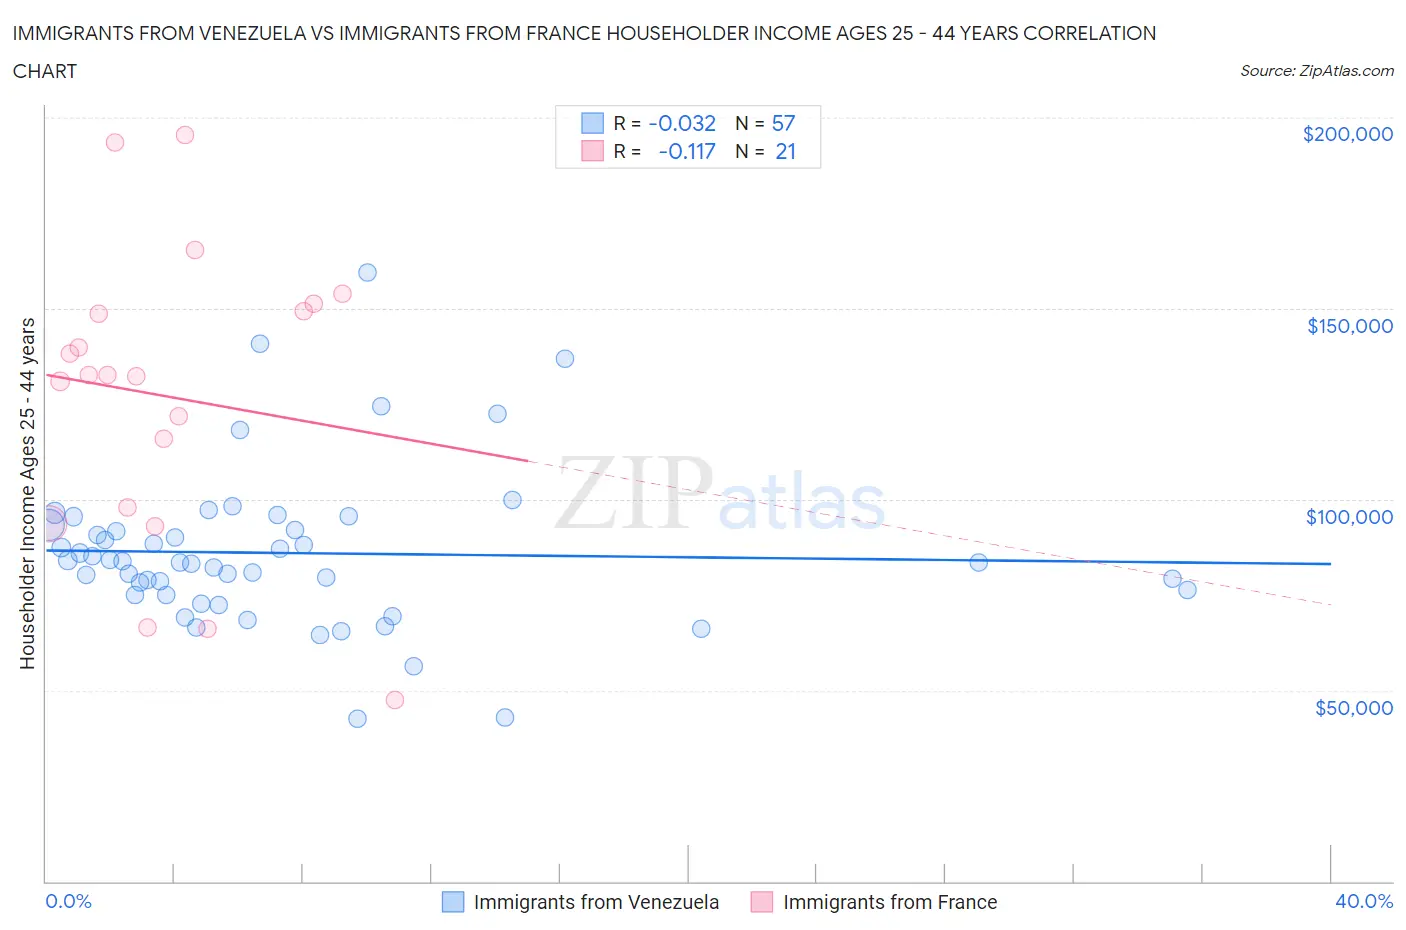 Immigrants from Venezuela vs Immigrants from France Householder Income Ages 25 - 44 years